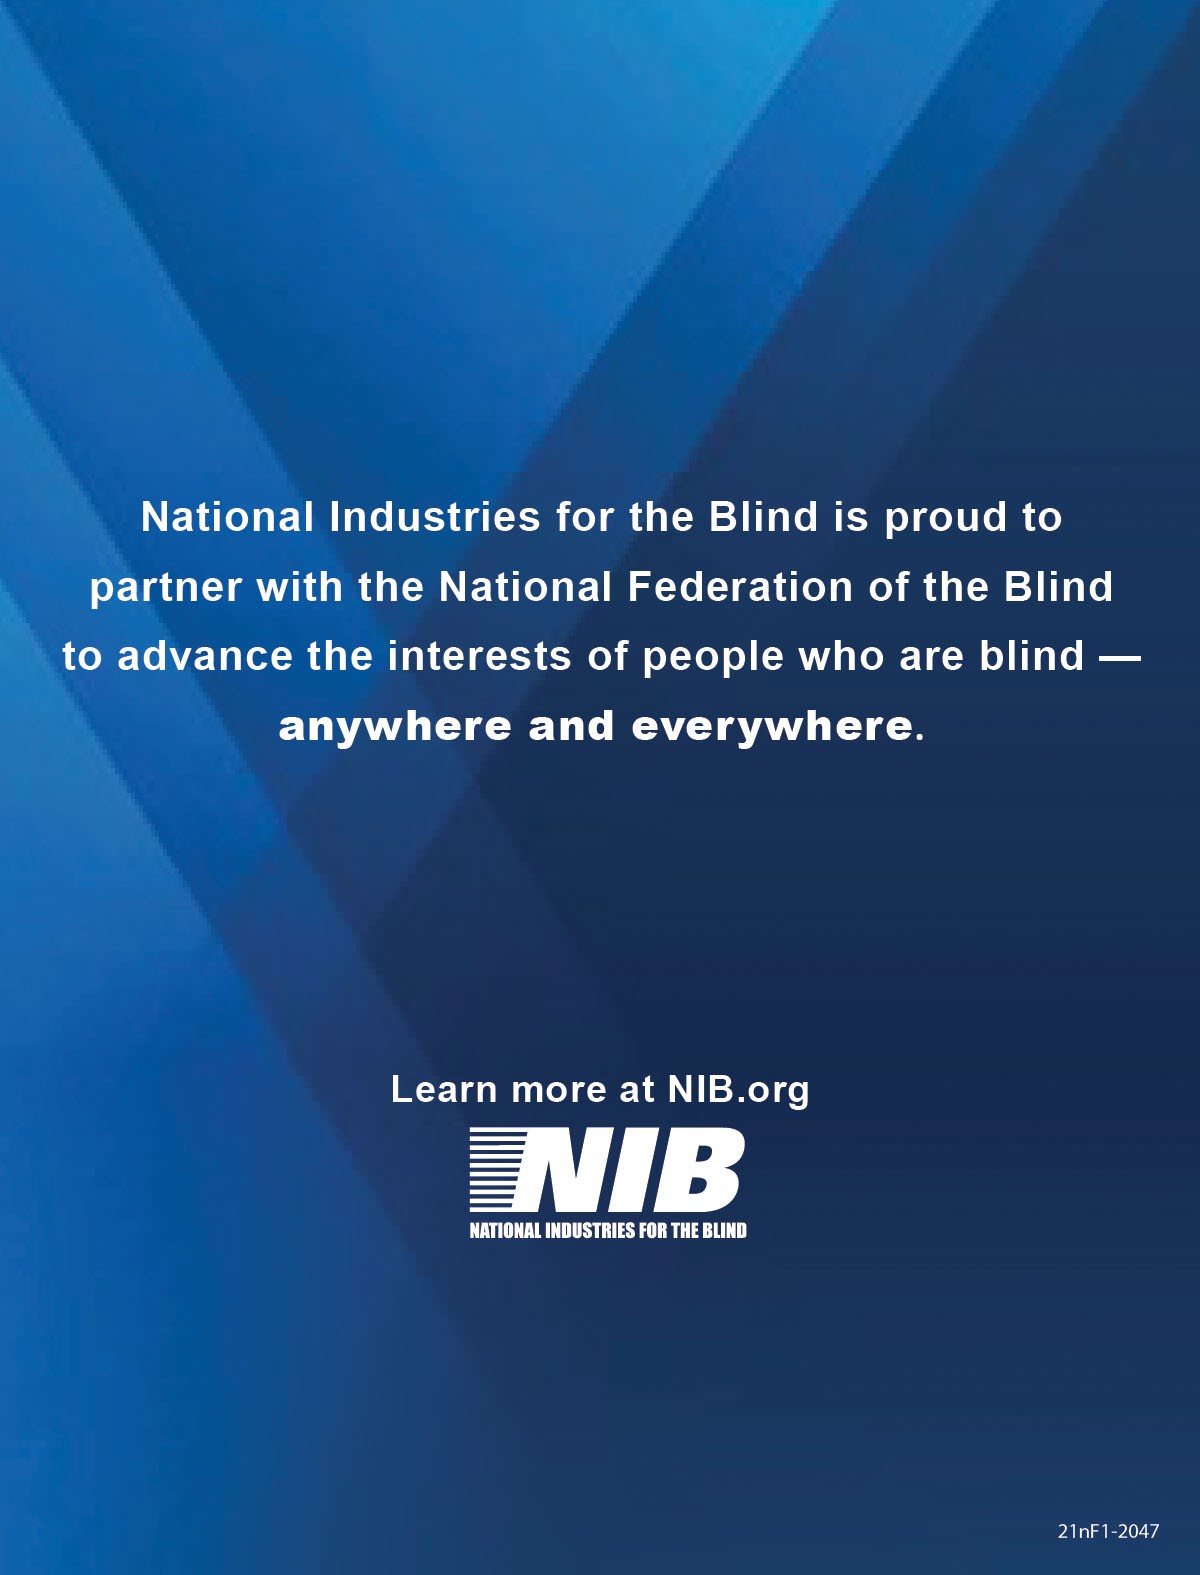 National Industries for the Blind National Industries for the Blind is proud to partner with the National Federation of the Blind to advance the interests of people who are blind – anywhere and everywhere. Learn more at NIB.org. 